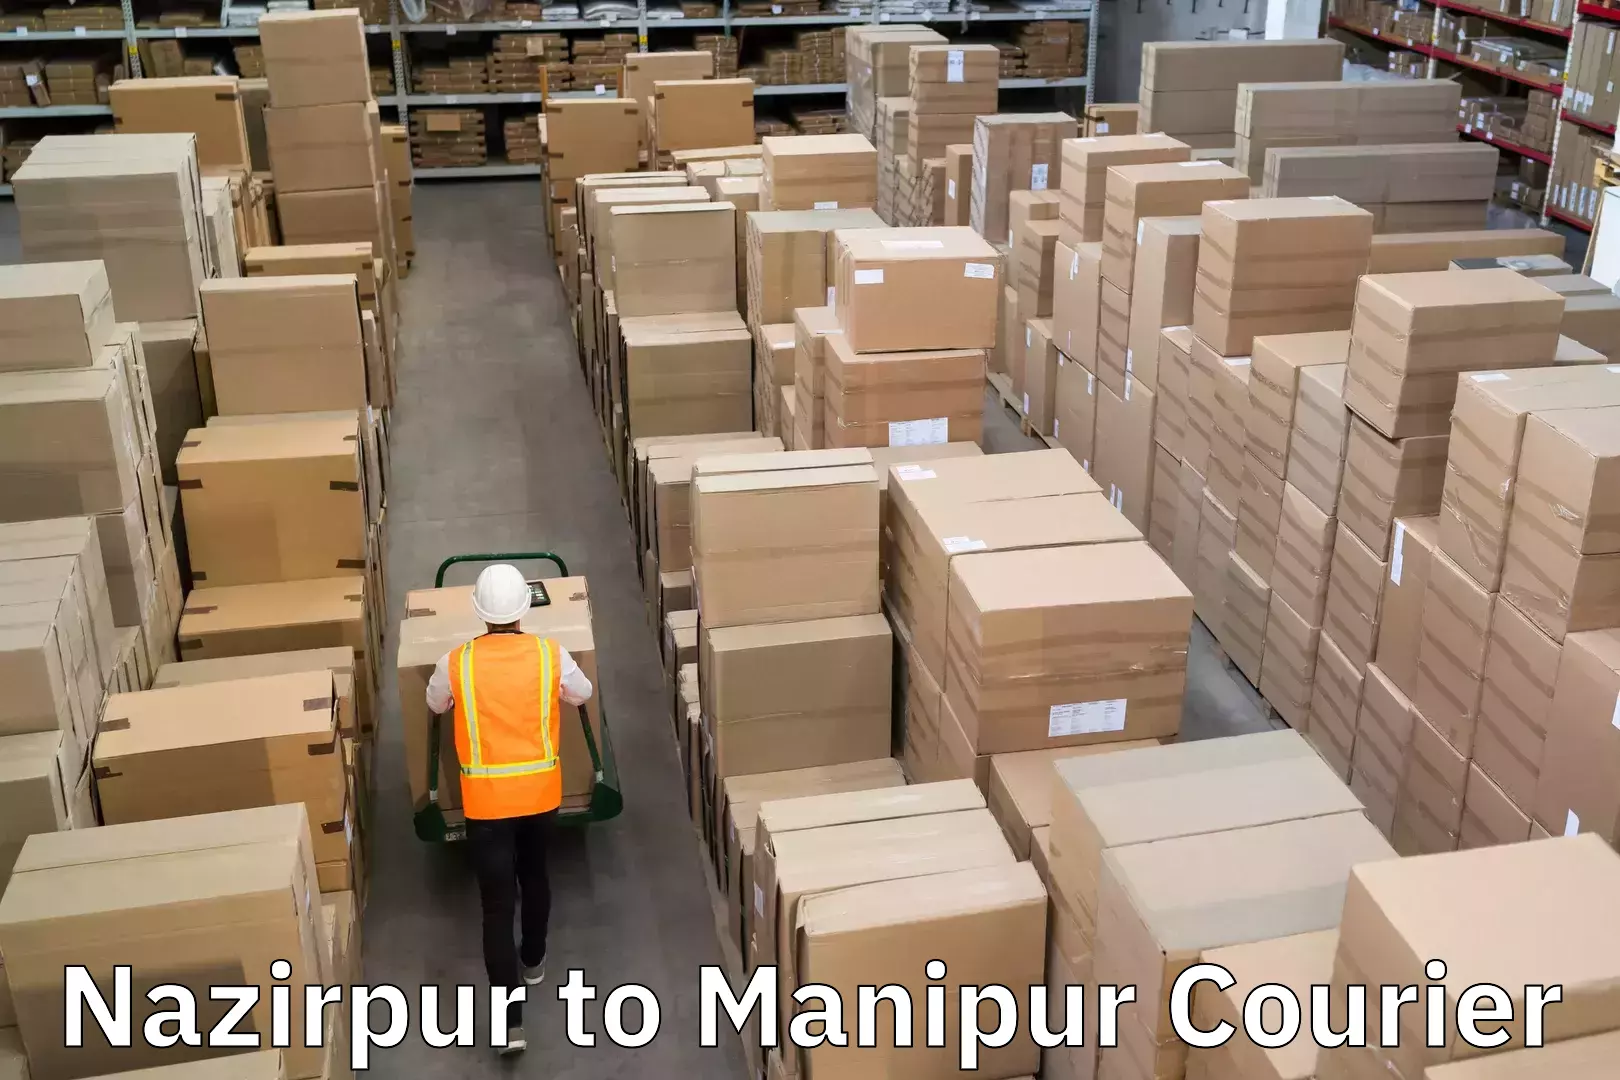 24-hour delivery options Nazirpur to Manipur